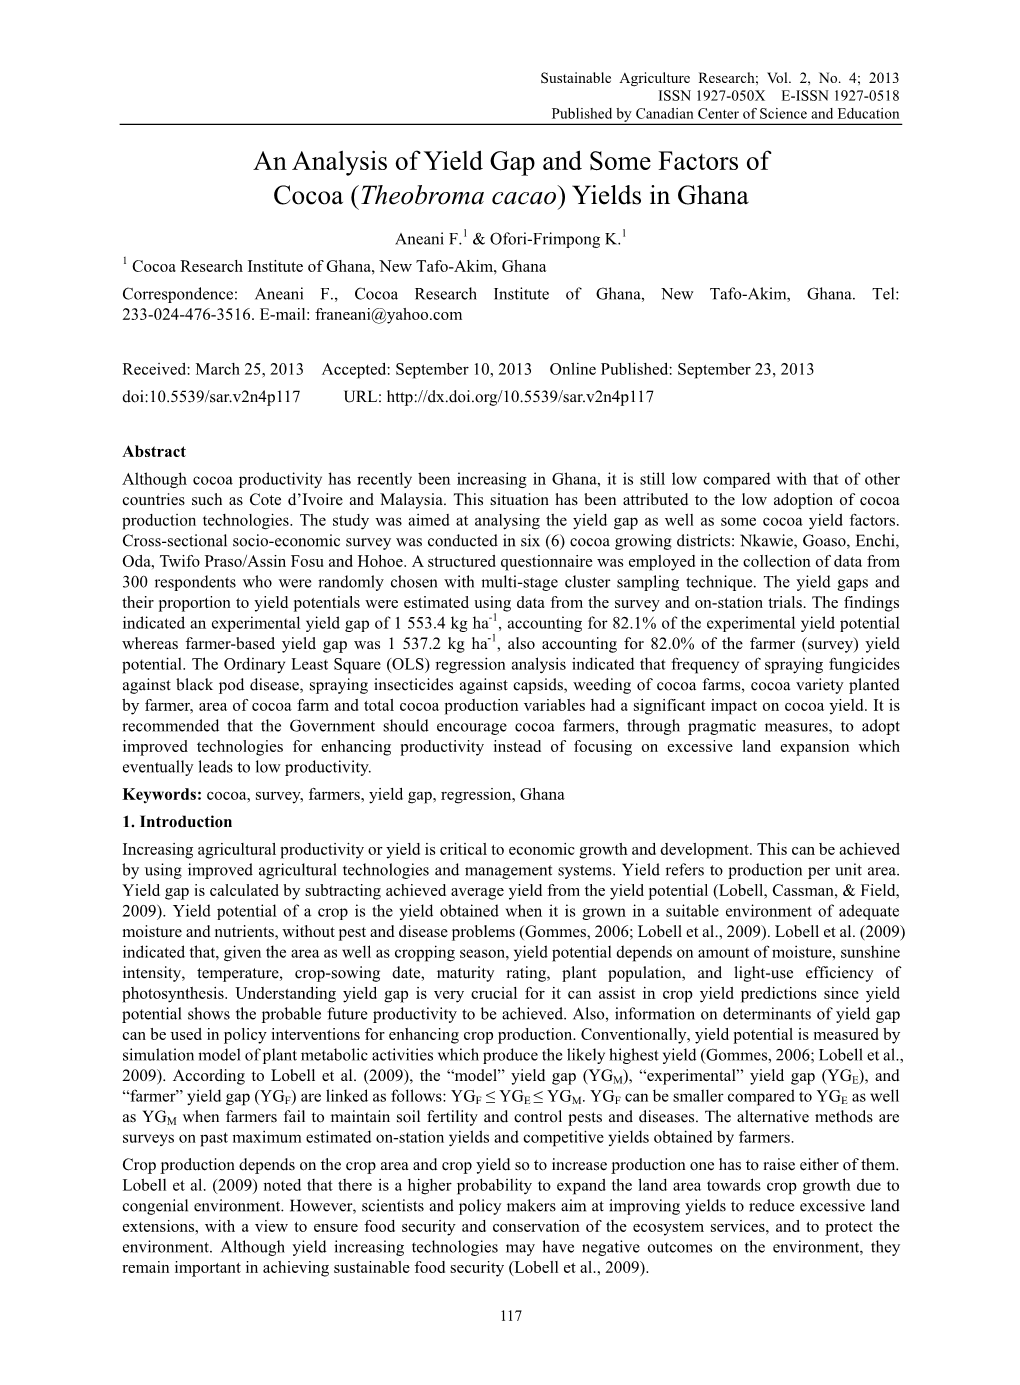 An Analysis of Yield Gap and Some Factors of Cocoa (Theobroma Cacao) Yields in Ghana